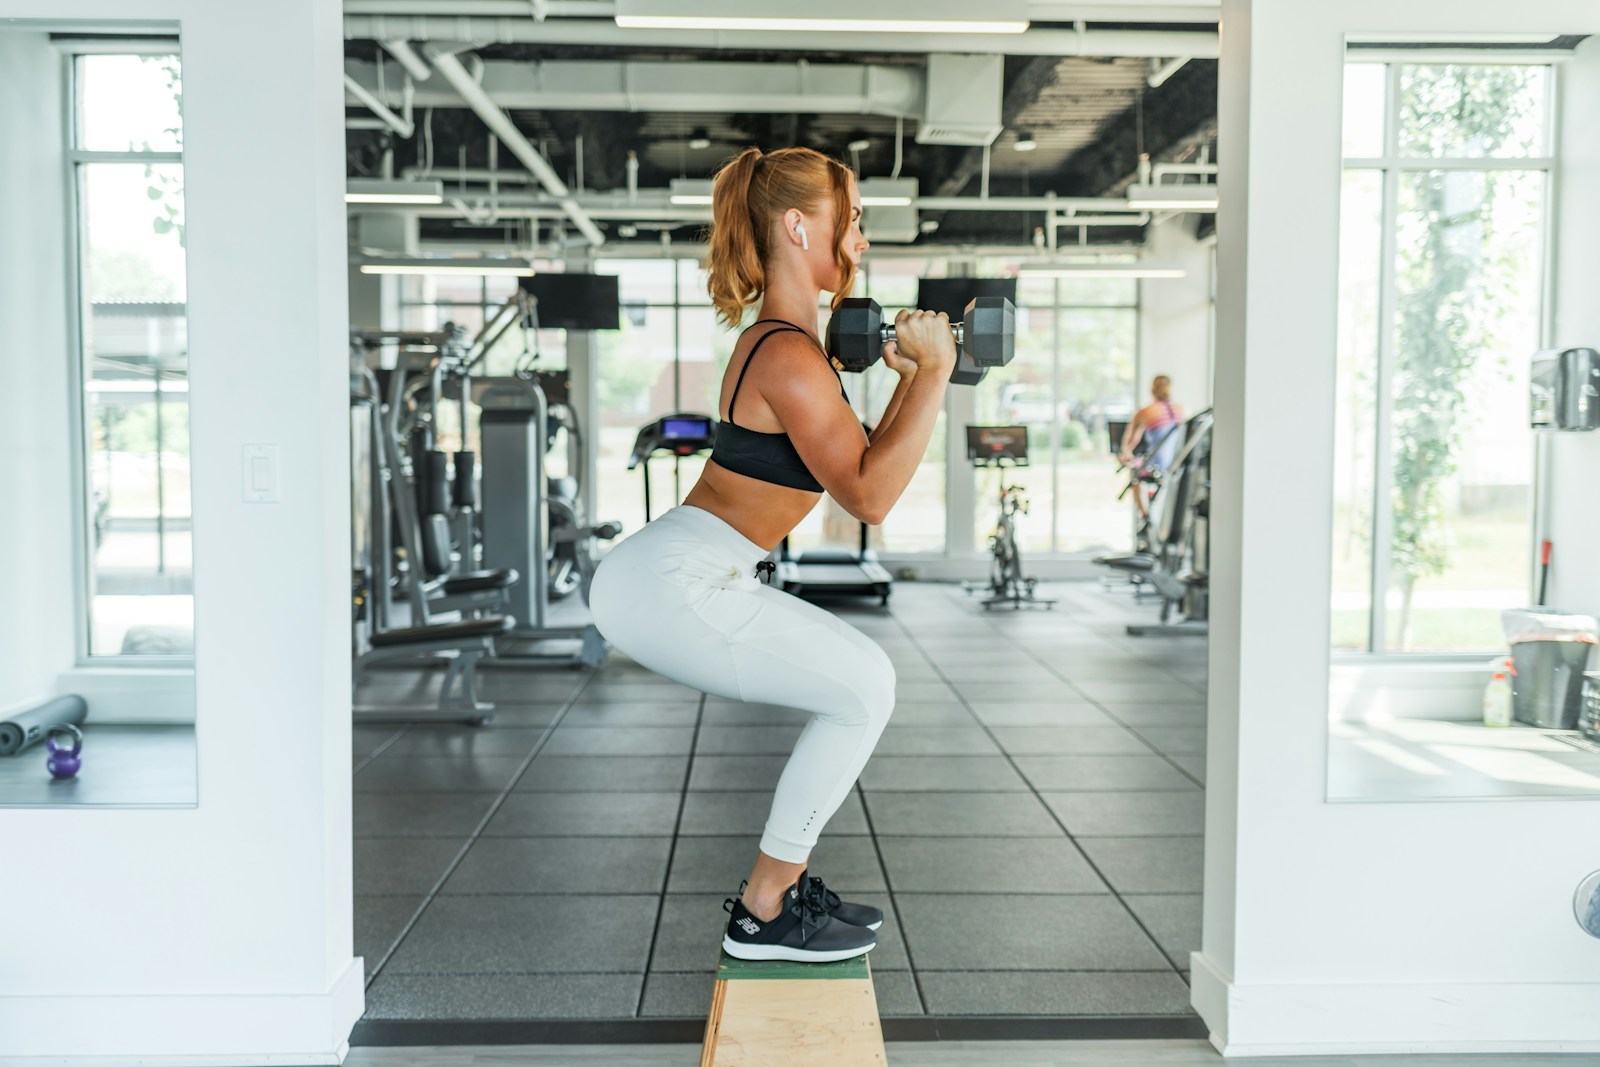 Build a Strong, Toned, Confident Body with Home Workouts on the FitCrew Women's Fitness App